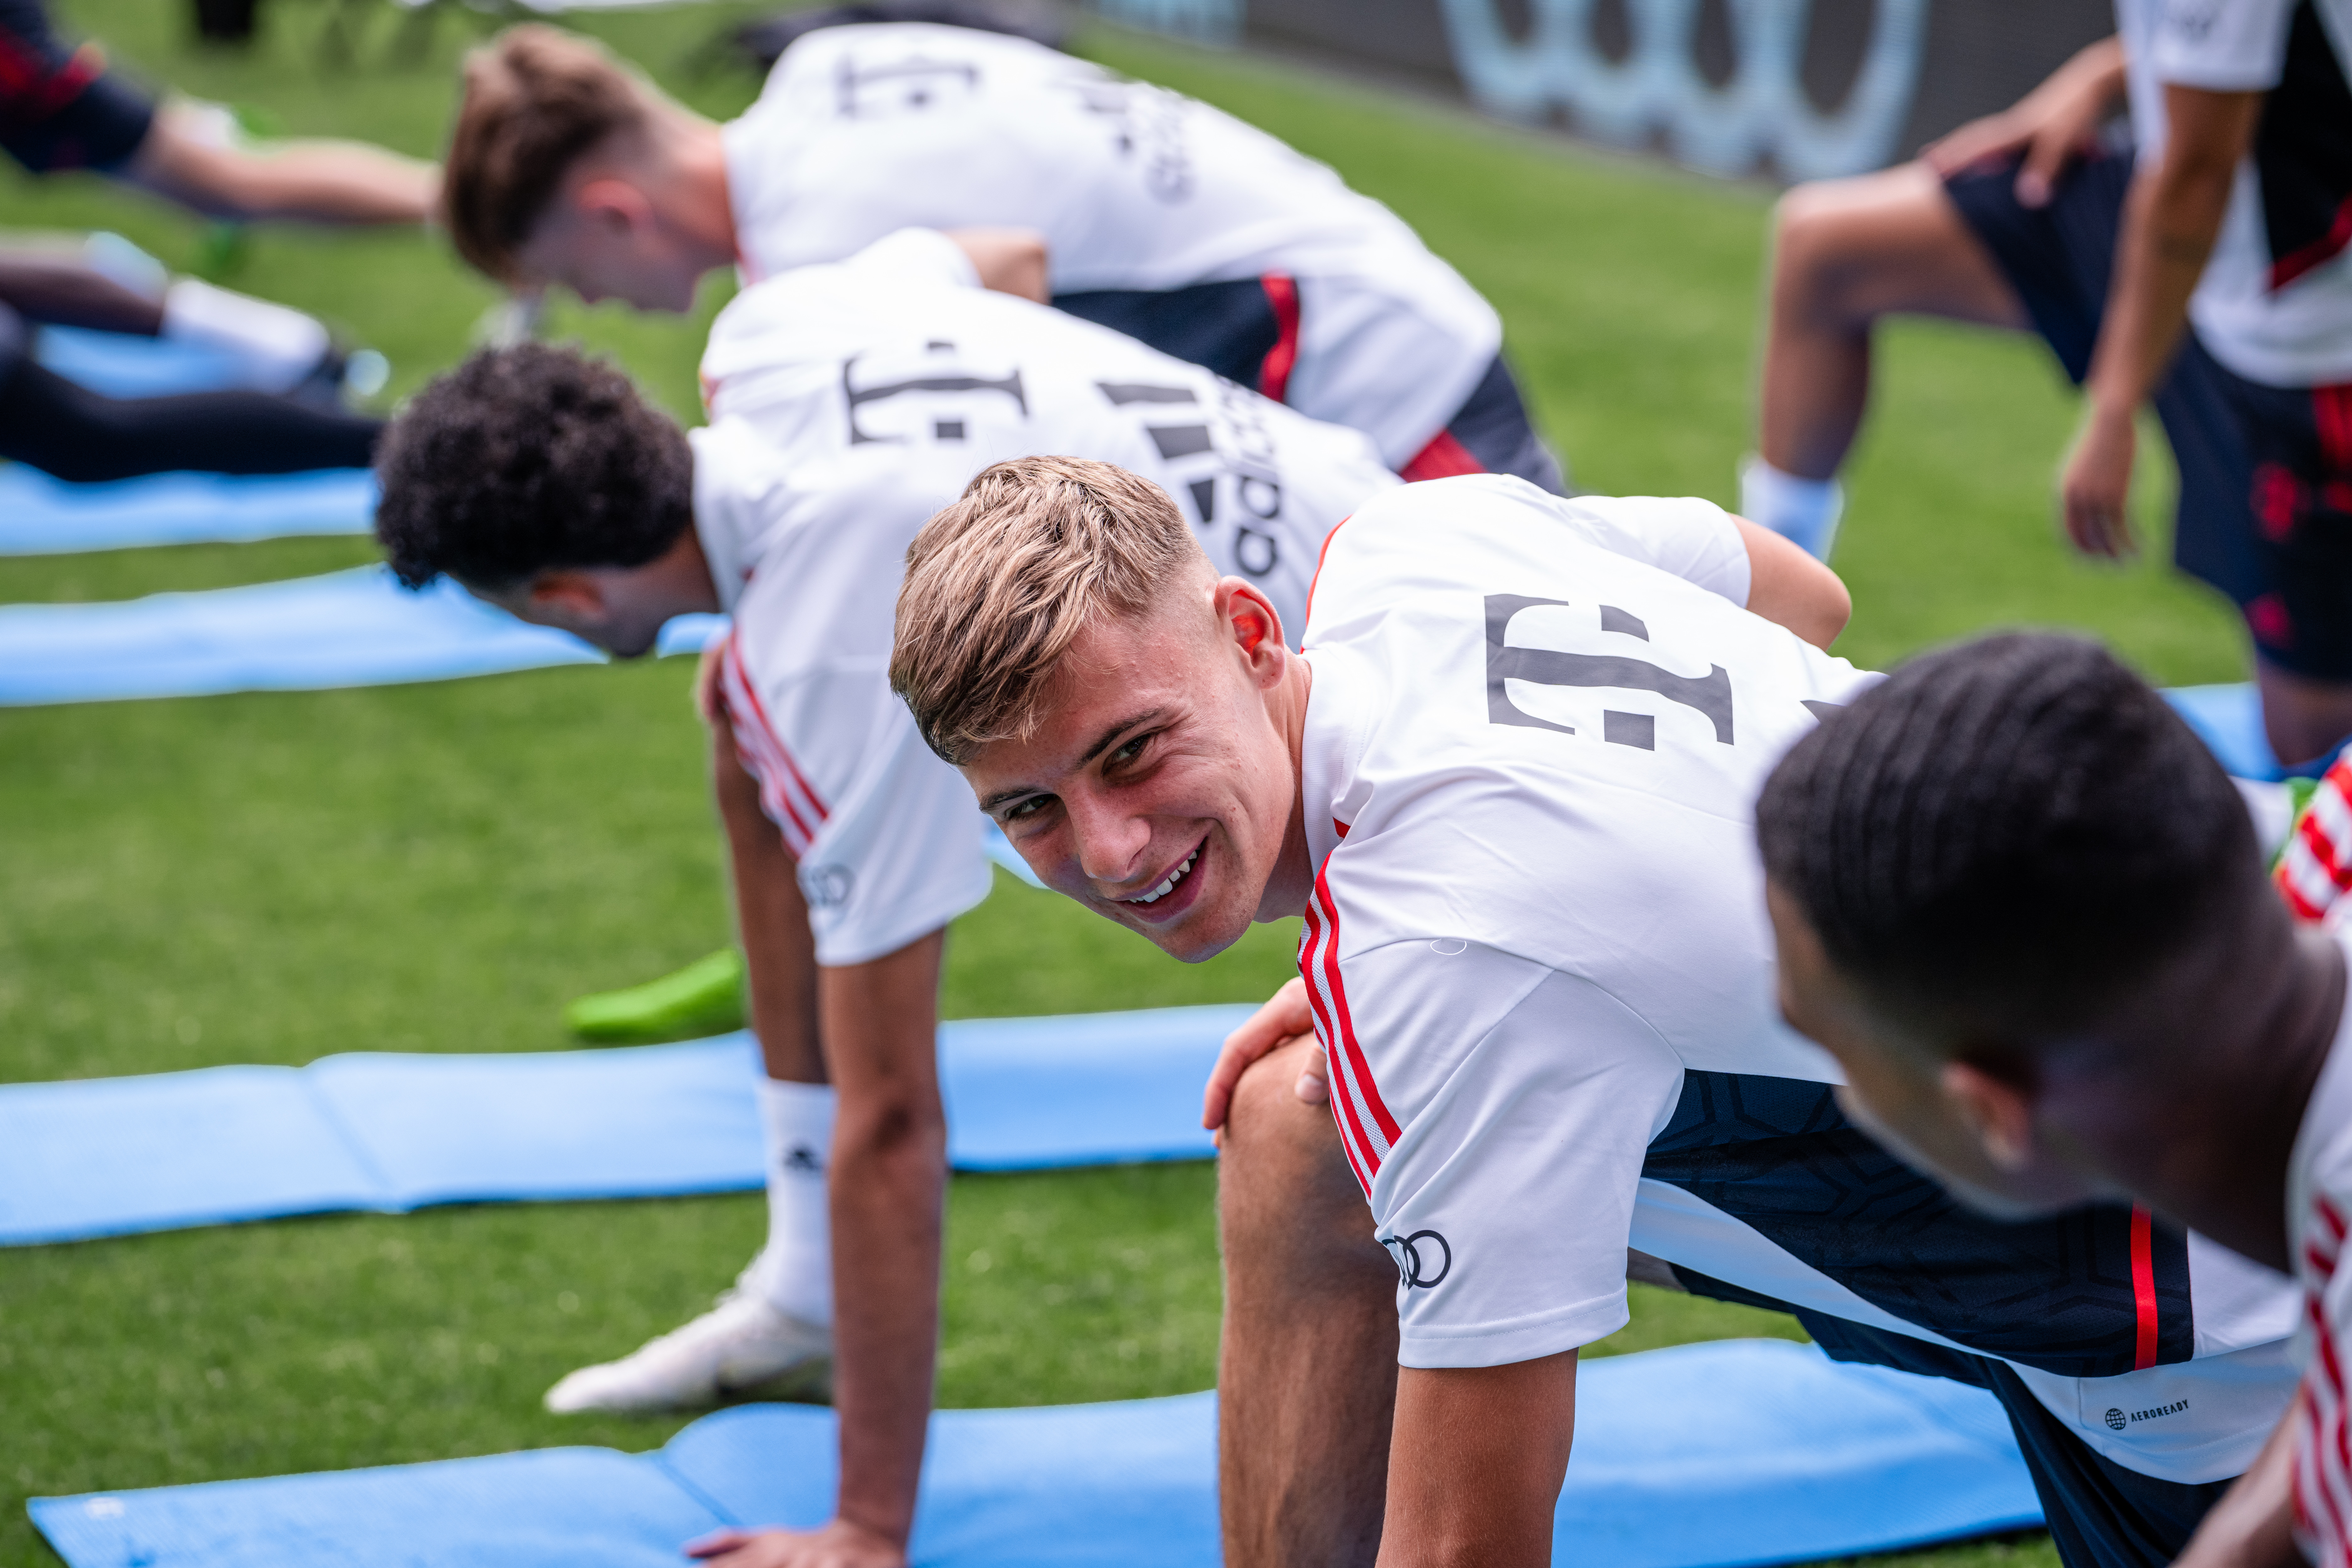 Gabriel Vidović turns and smiles to a teammate during stretches at a Bayern training session in DC on July 19